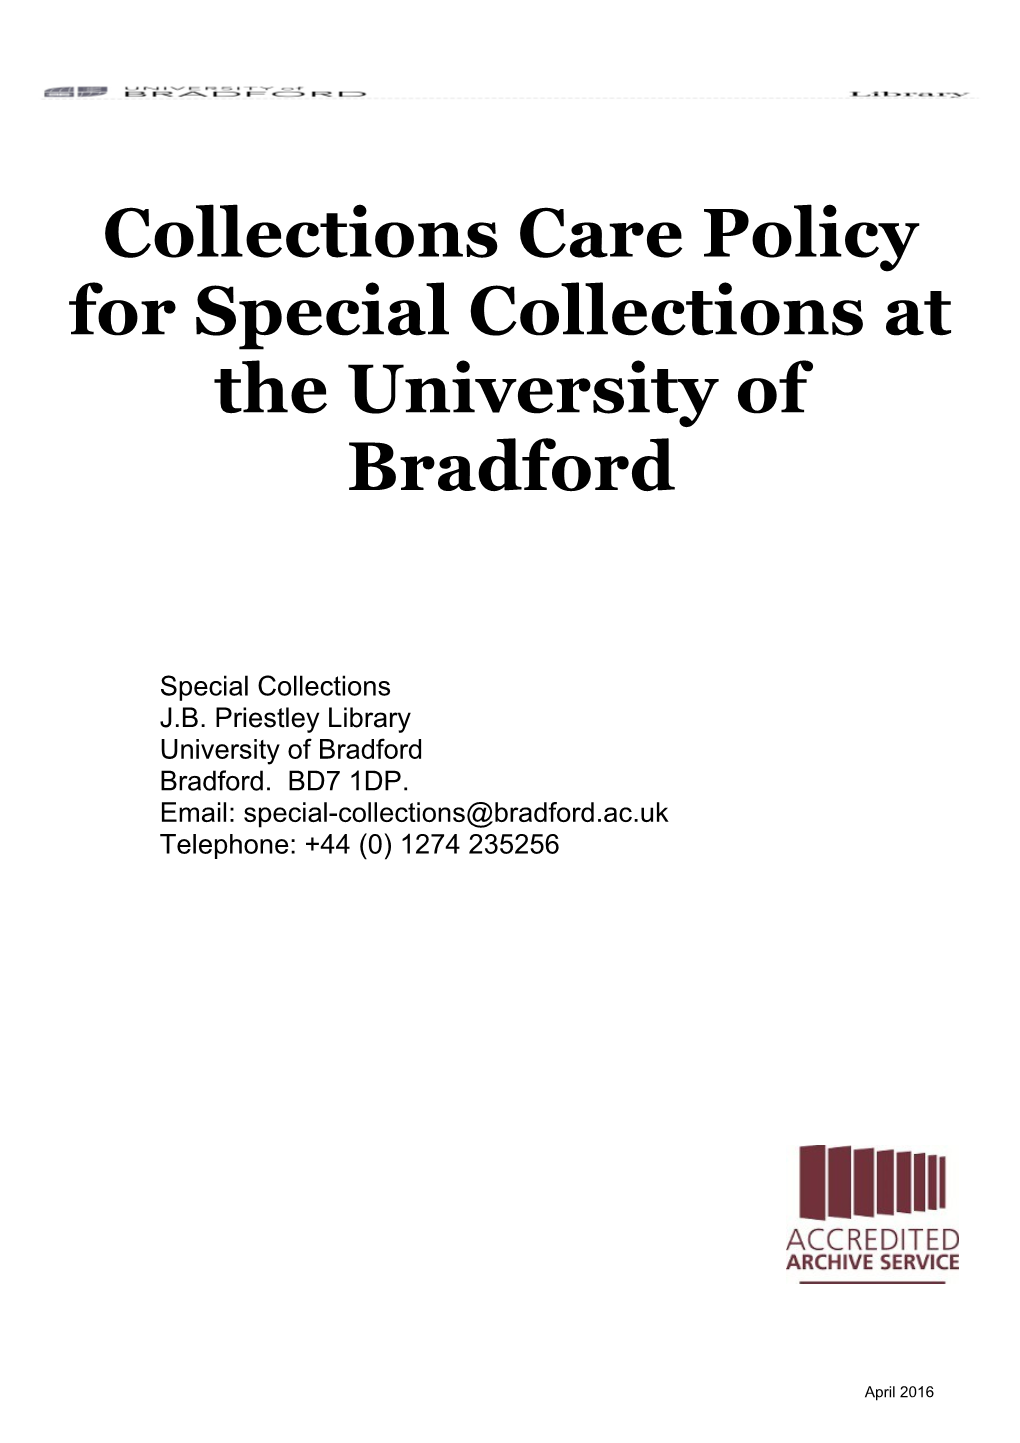 Collections Care Policy for Special Collections at the University of Bradford